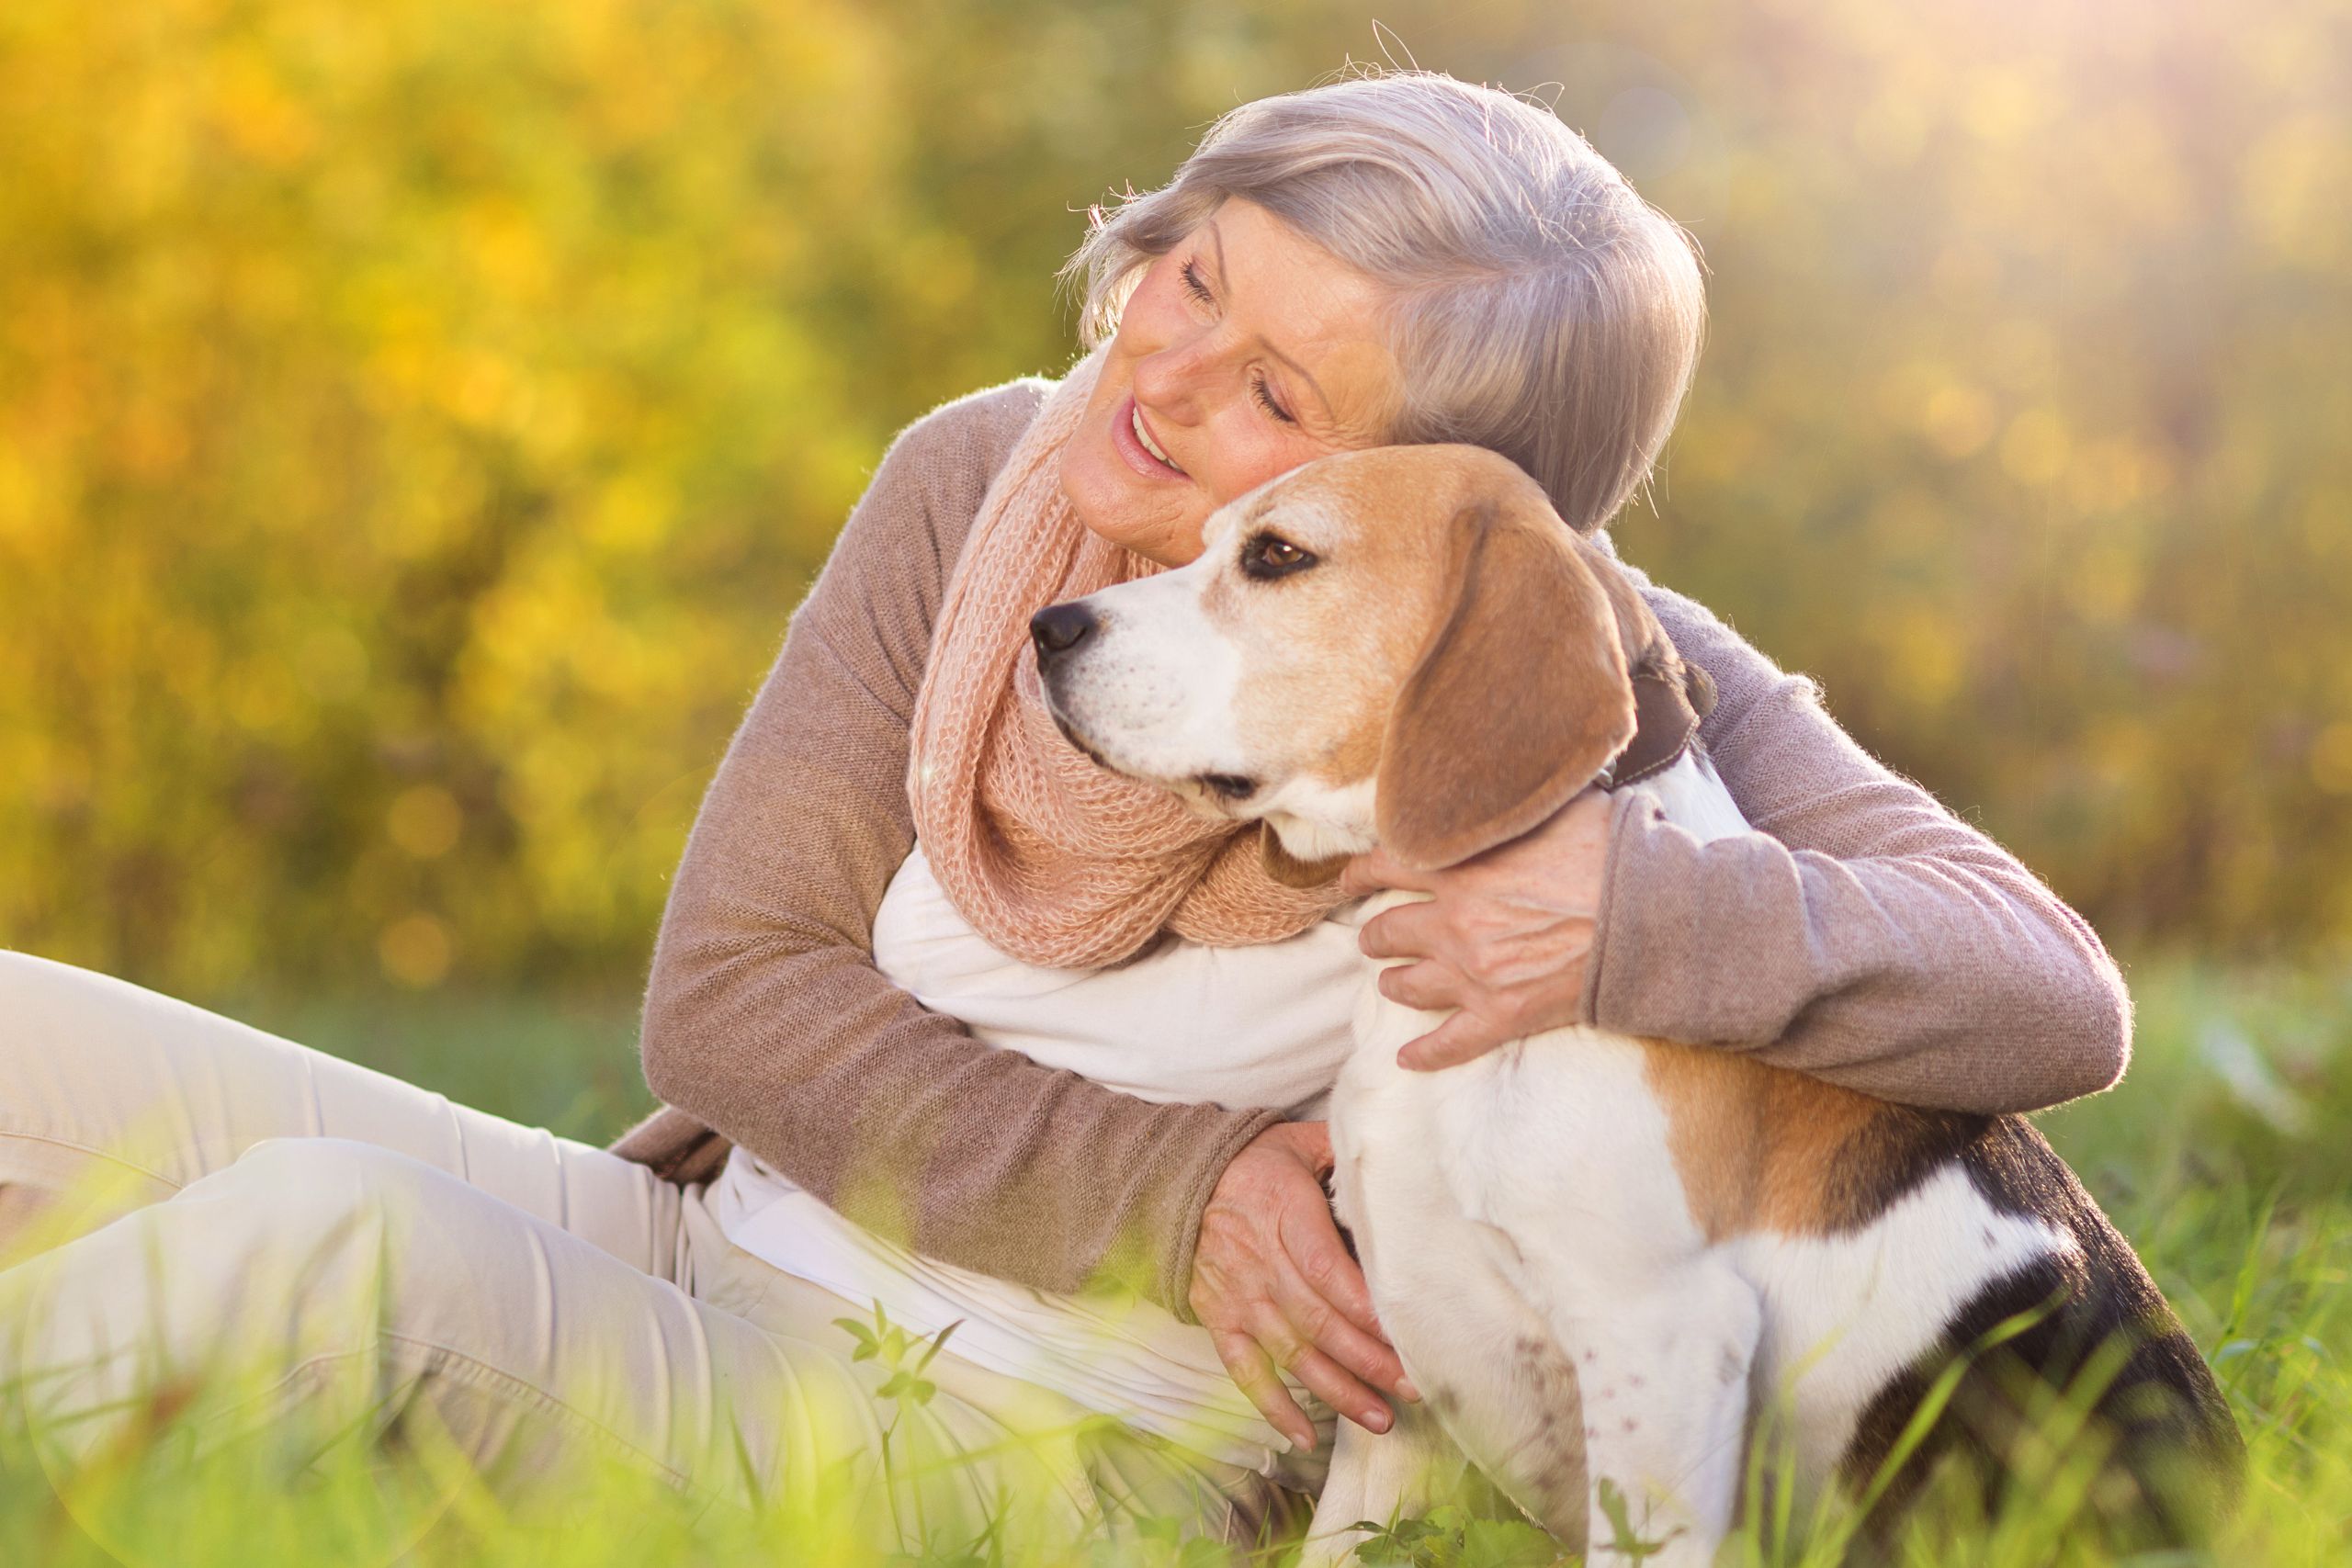 An elderly woman against an autumn background, sitting in the grass and hugging a cute, chunky beagle